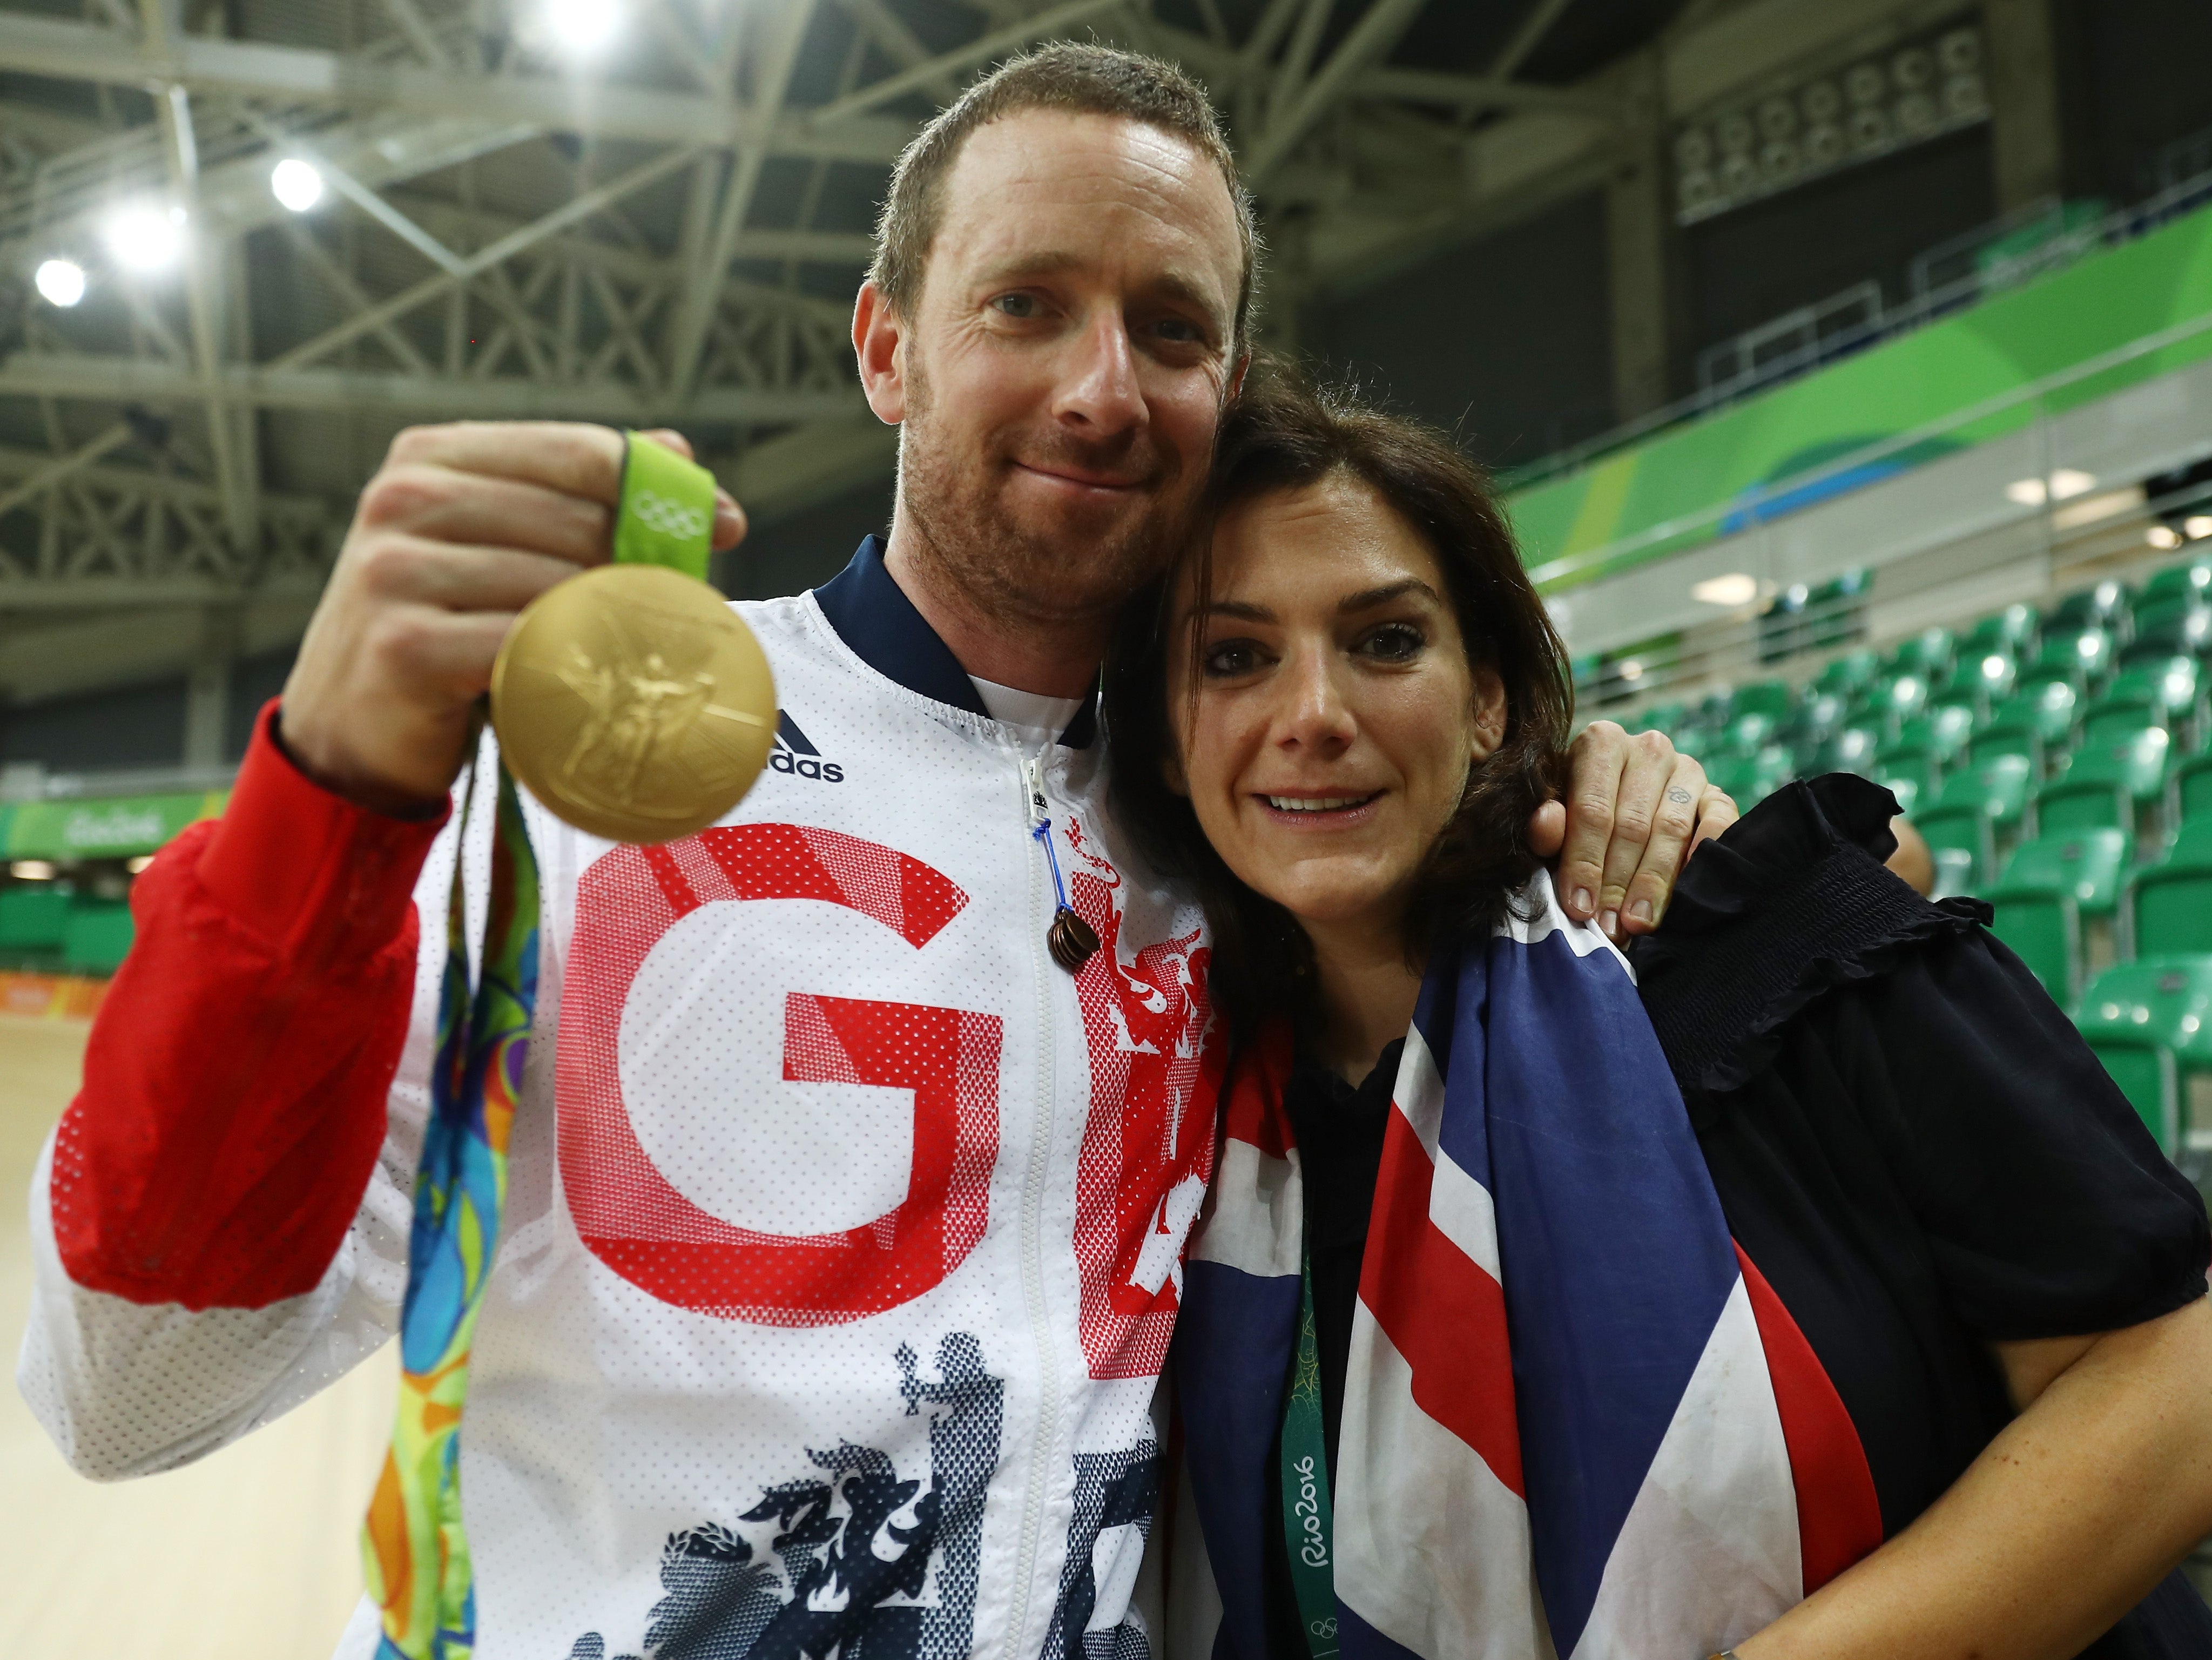 The cycling star’s relationship with wife Catherine couldn’t survive the public scrutiny